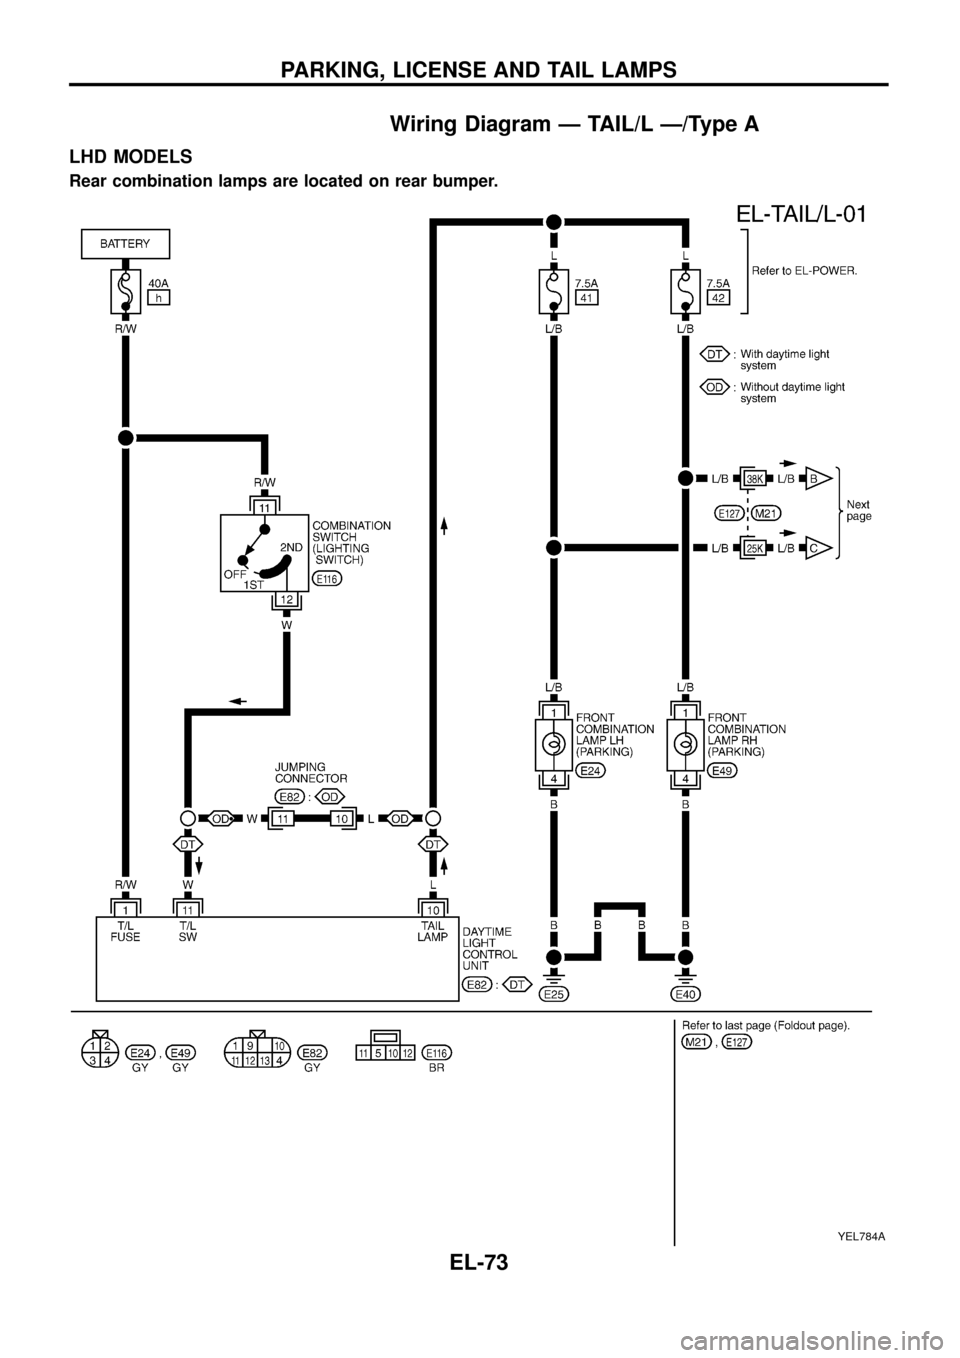 NISSAN PATROL 1998 Y61 / 5.G Electrical System Manual PDF Wiring Diagram Ð TAIL/L Ð/Type A
LHD MODELS
Rear combination lamps are located on rear bumper.
YEL784A
PARKING, LICENSE AND TAIL LAMPS
EL-73 